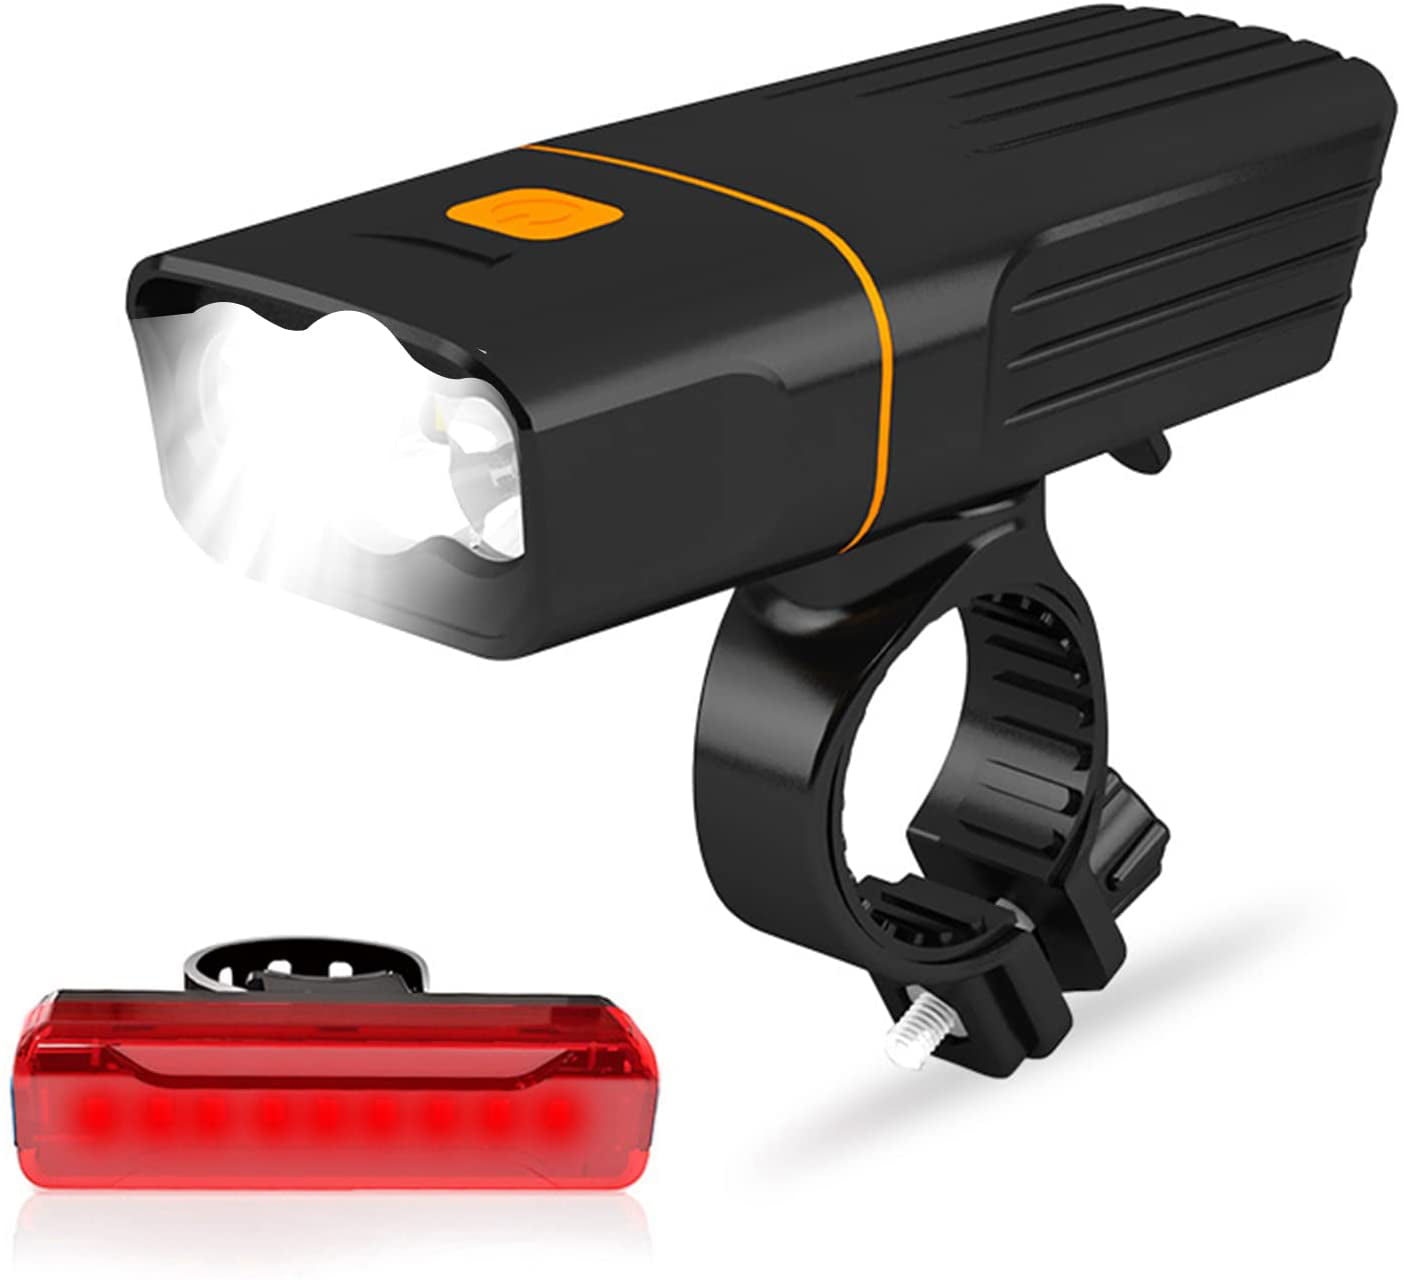 TK3 BIKE LIGHTS FULLY USB RECHARGEABLE SUPER BRIGHT BICYCLE LIGHT WATERPROOF SET 